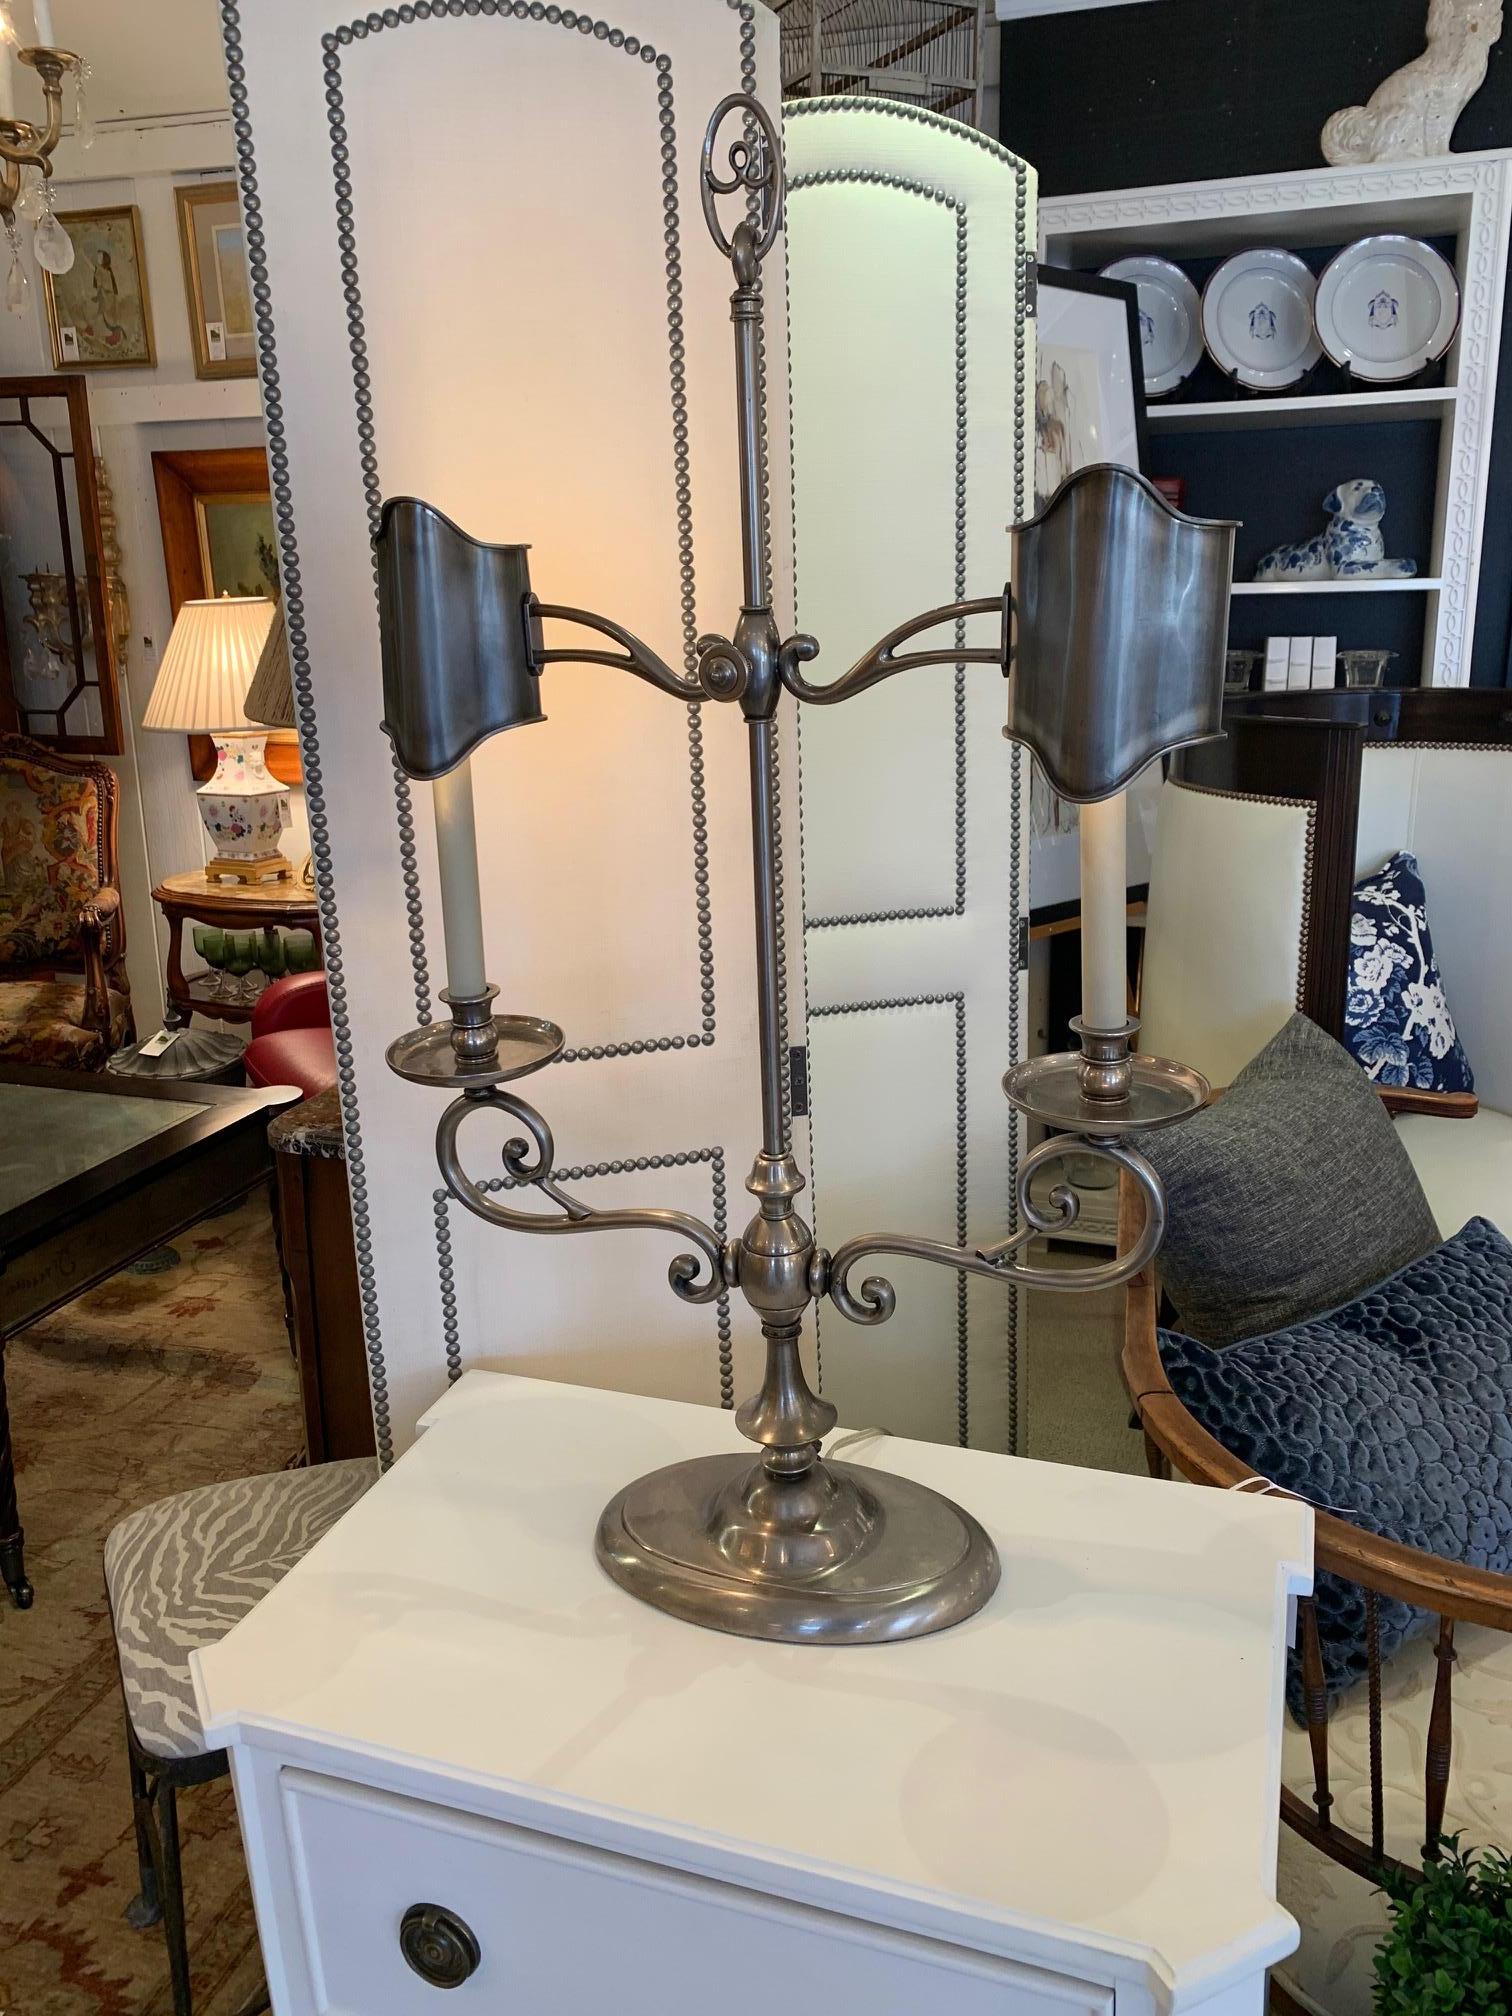 Handsome tall pewter table lamp having two arms and beautiful style by iconic lighting manufacturer Chapman.